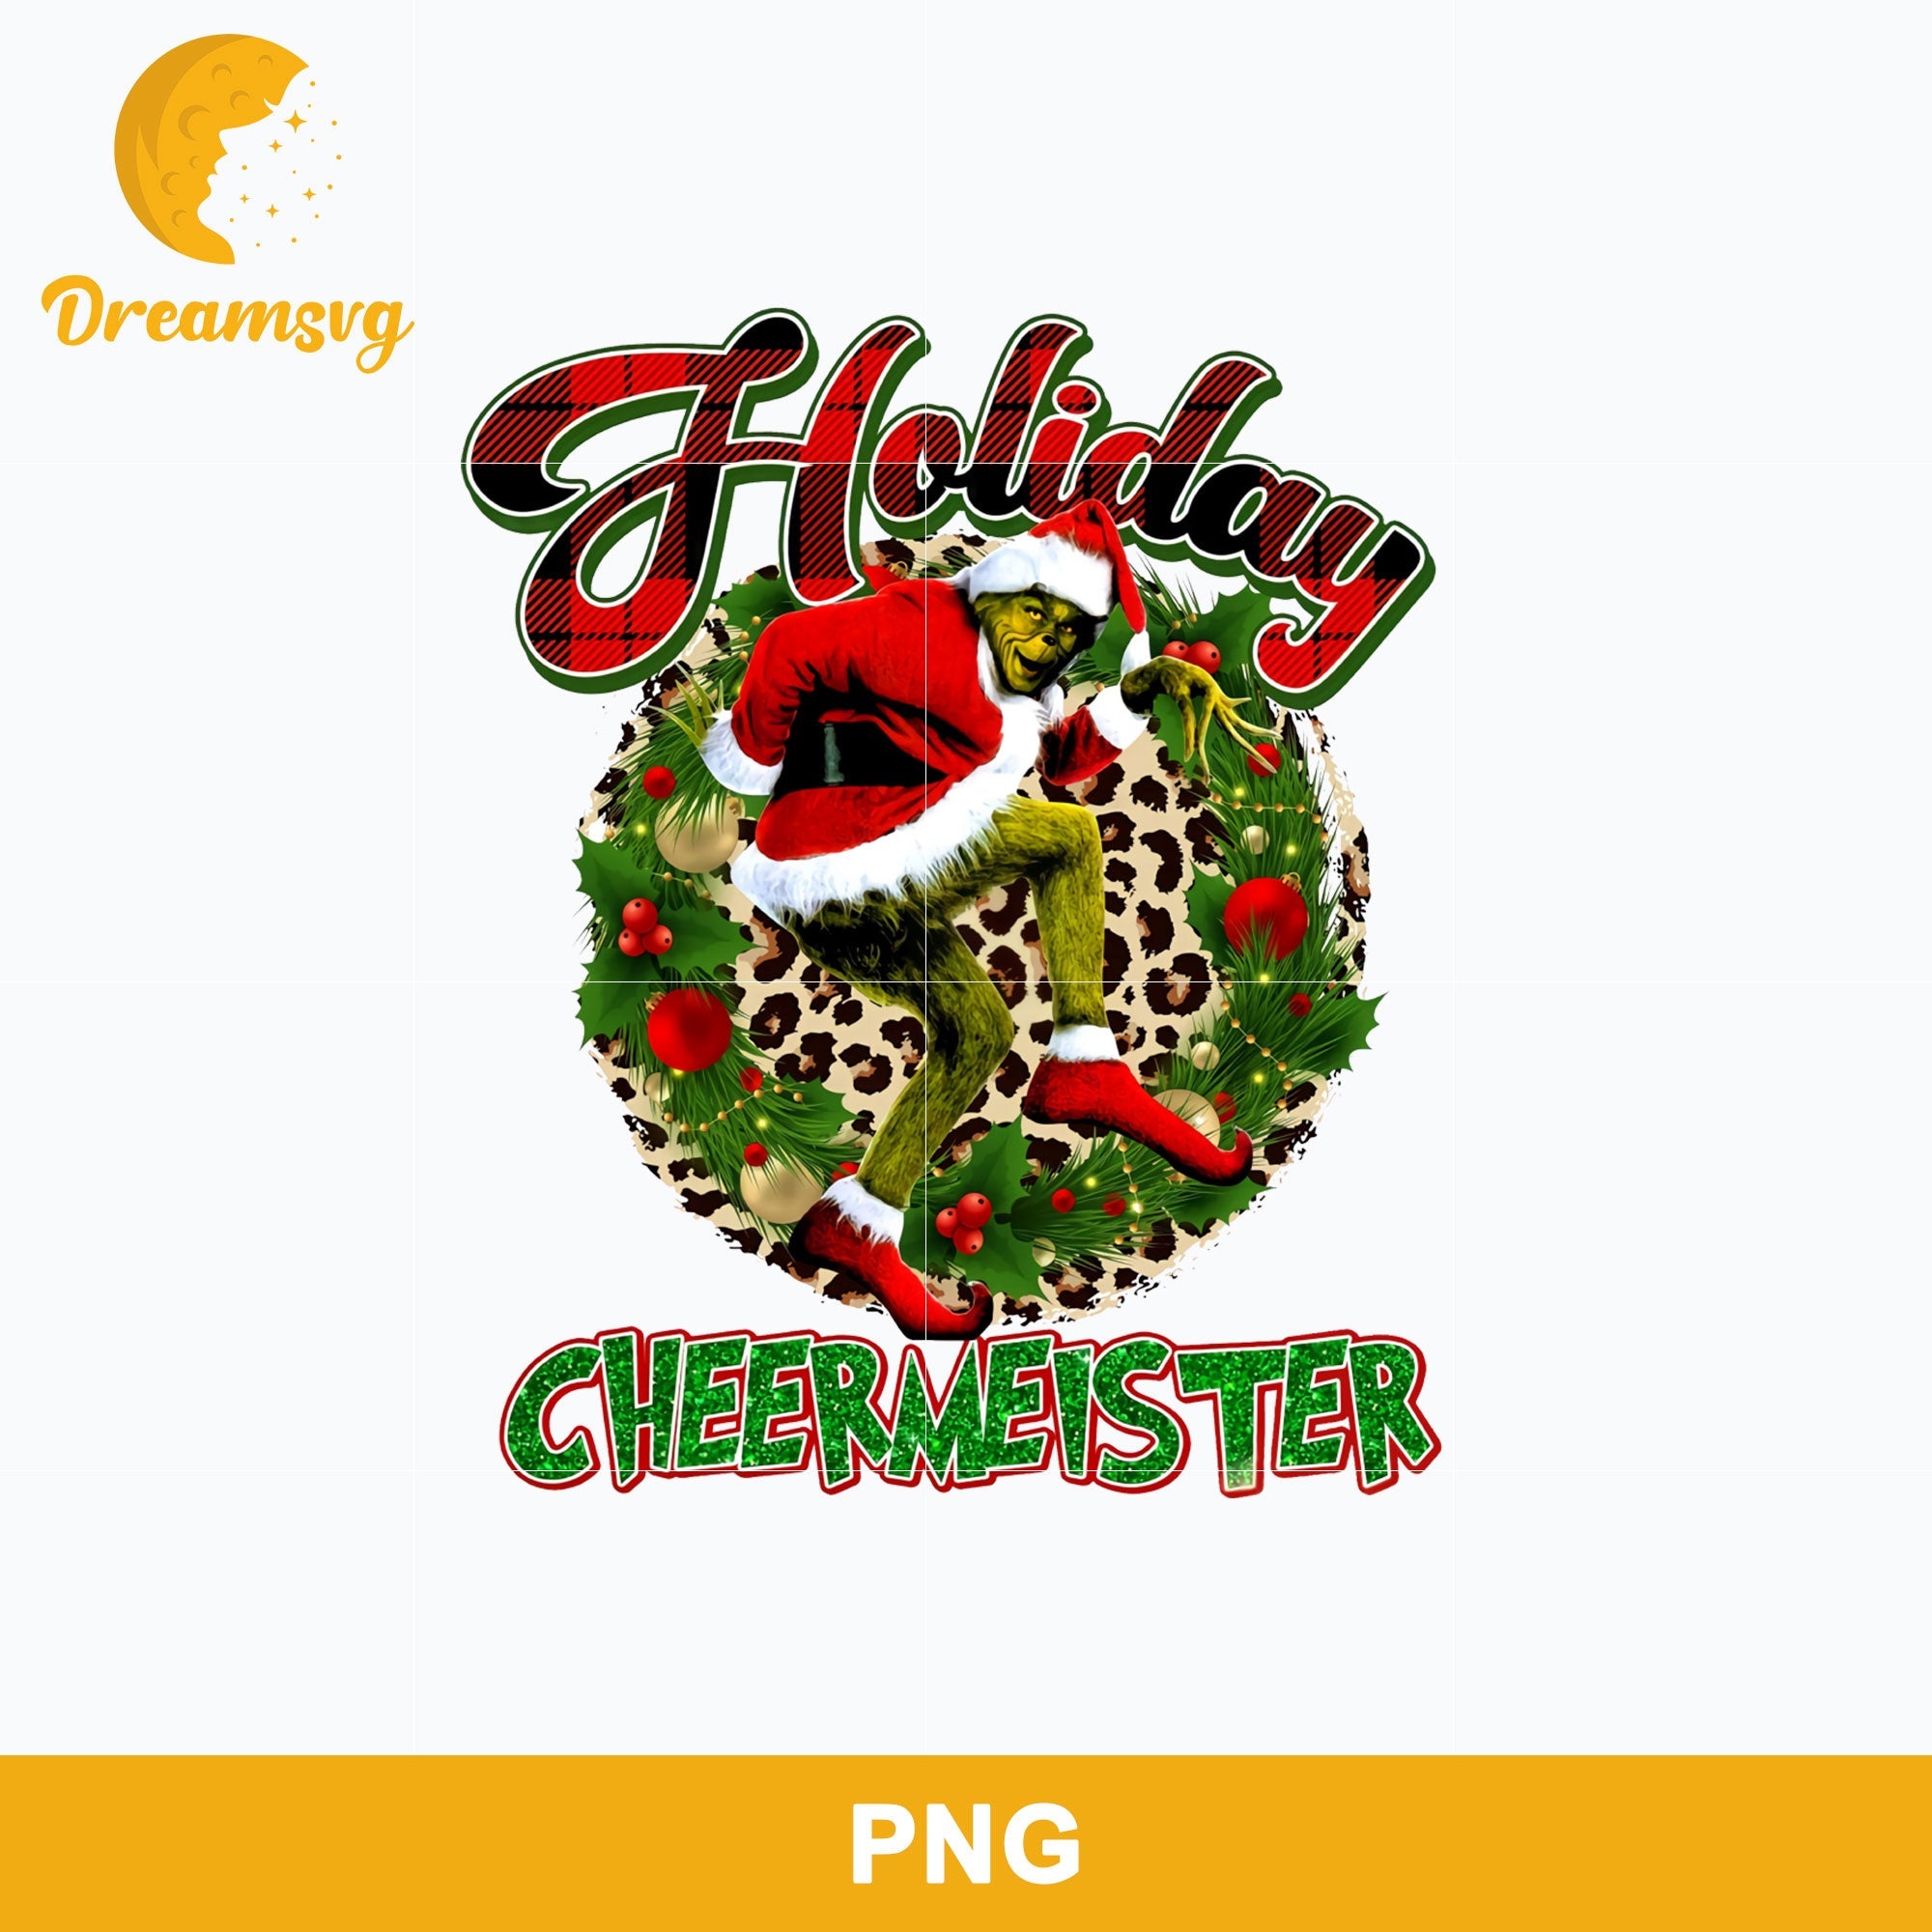 Holiday Cheermeister PNG, Grinch Christmas PNG, Christmas PNG.